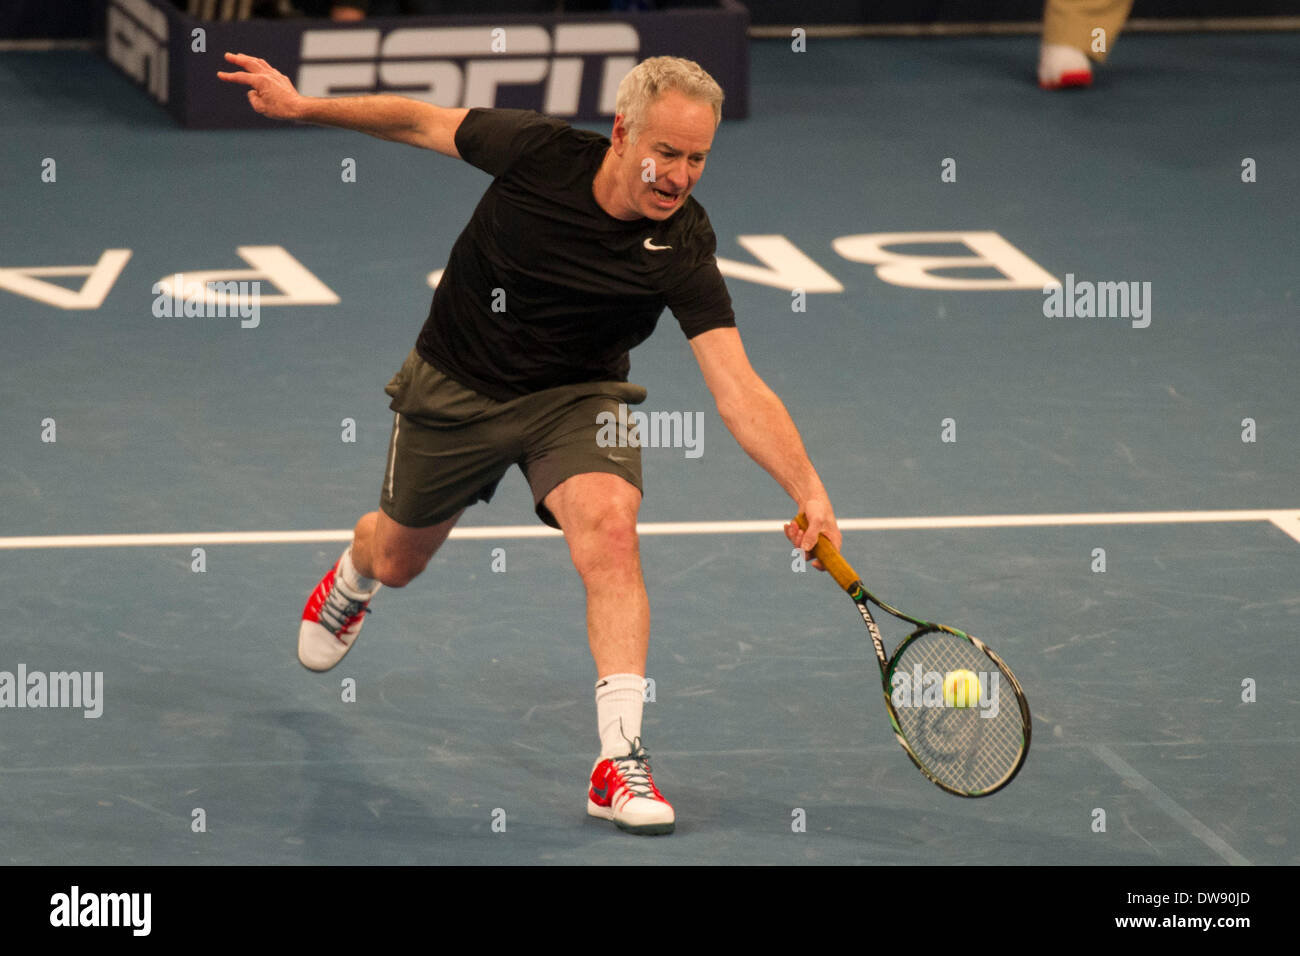 Manhattan, New York, USA. 3rd Mar, 2014. March 03, 2014: John McEnroe reaches for a volley during the BNP Paribas Showdown on World Tennis Day at Madison Square Garden in Manhattan, New York. Credit:  csm/Alamy Live News Stock Photo